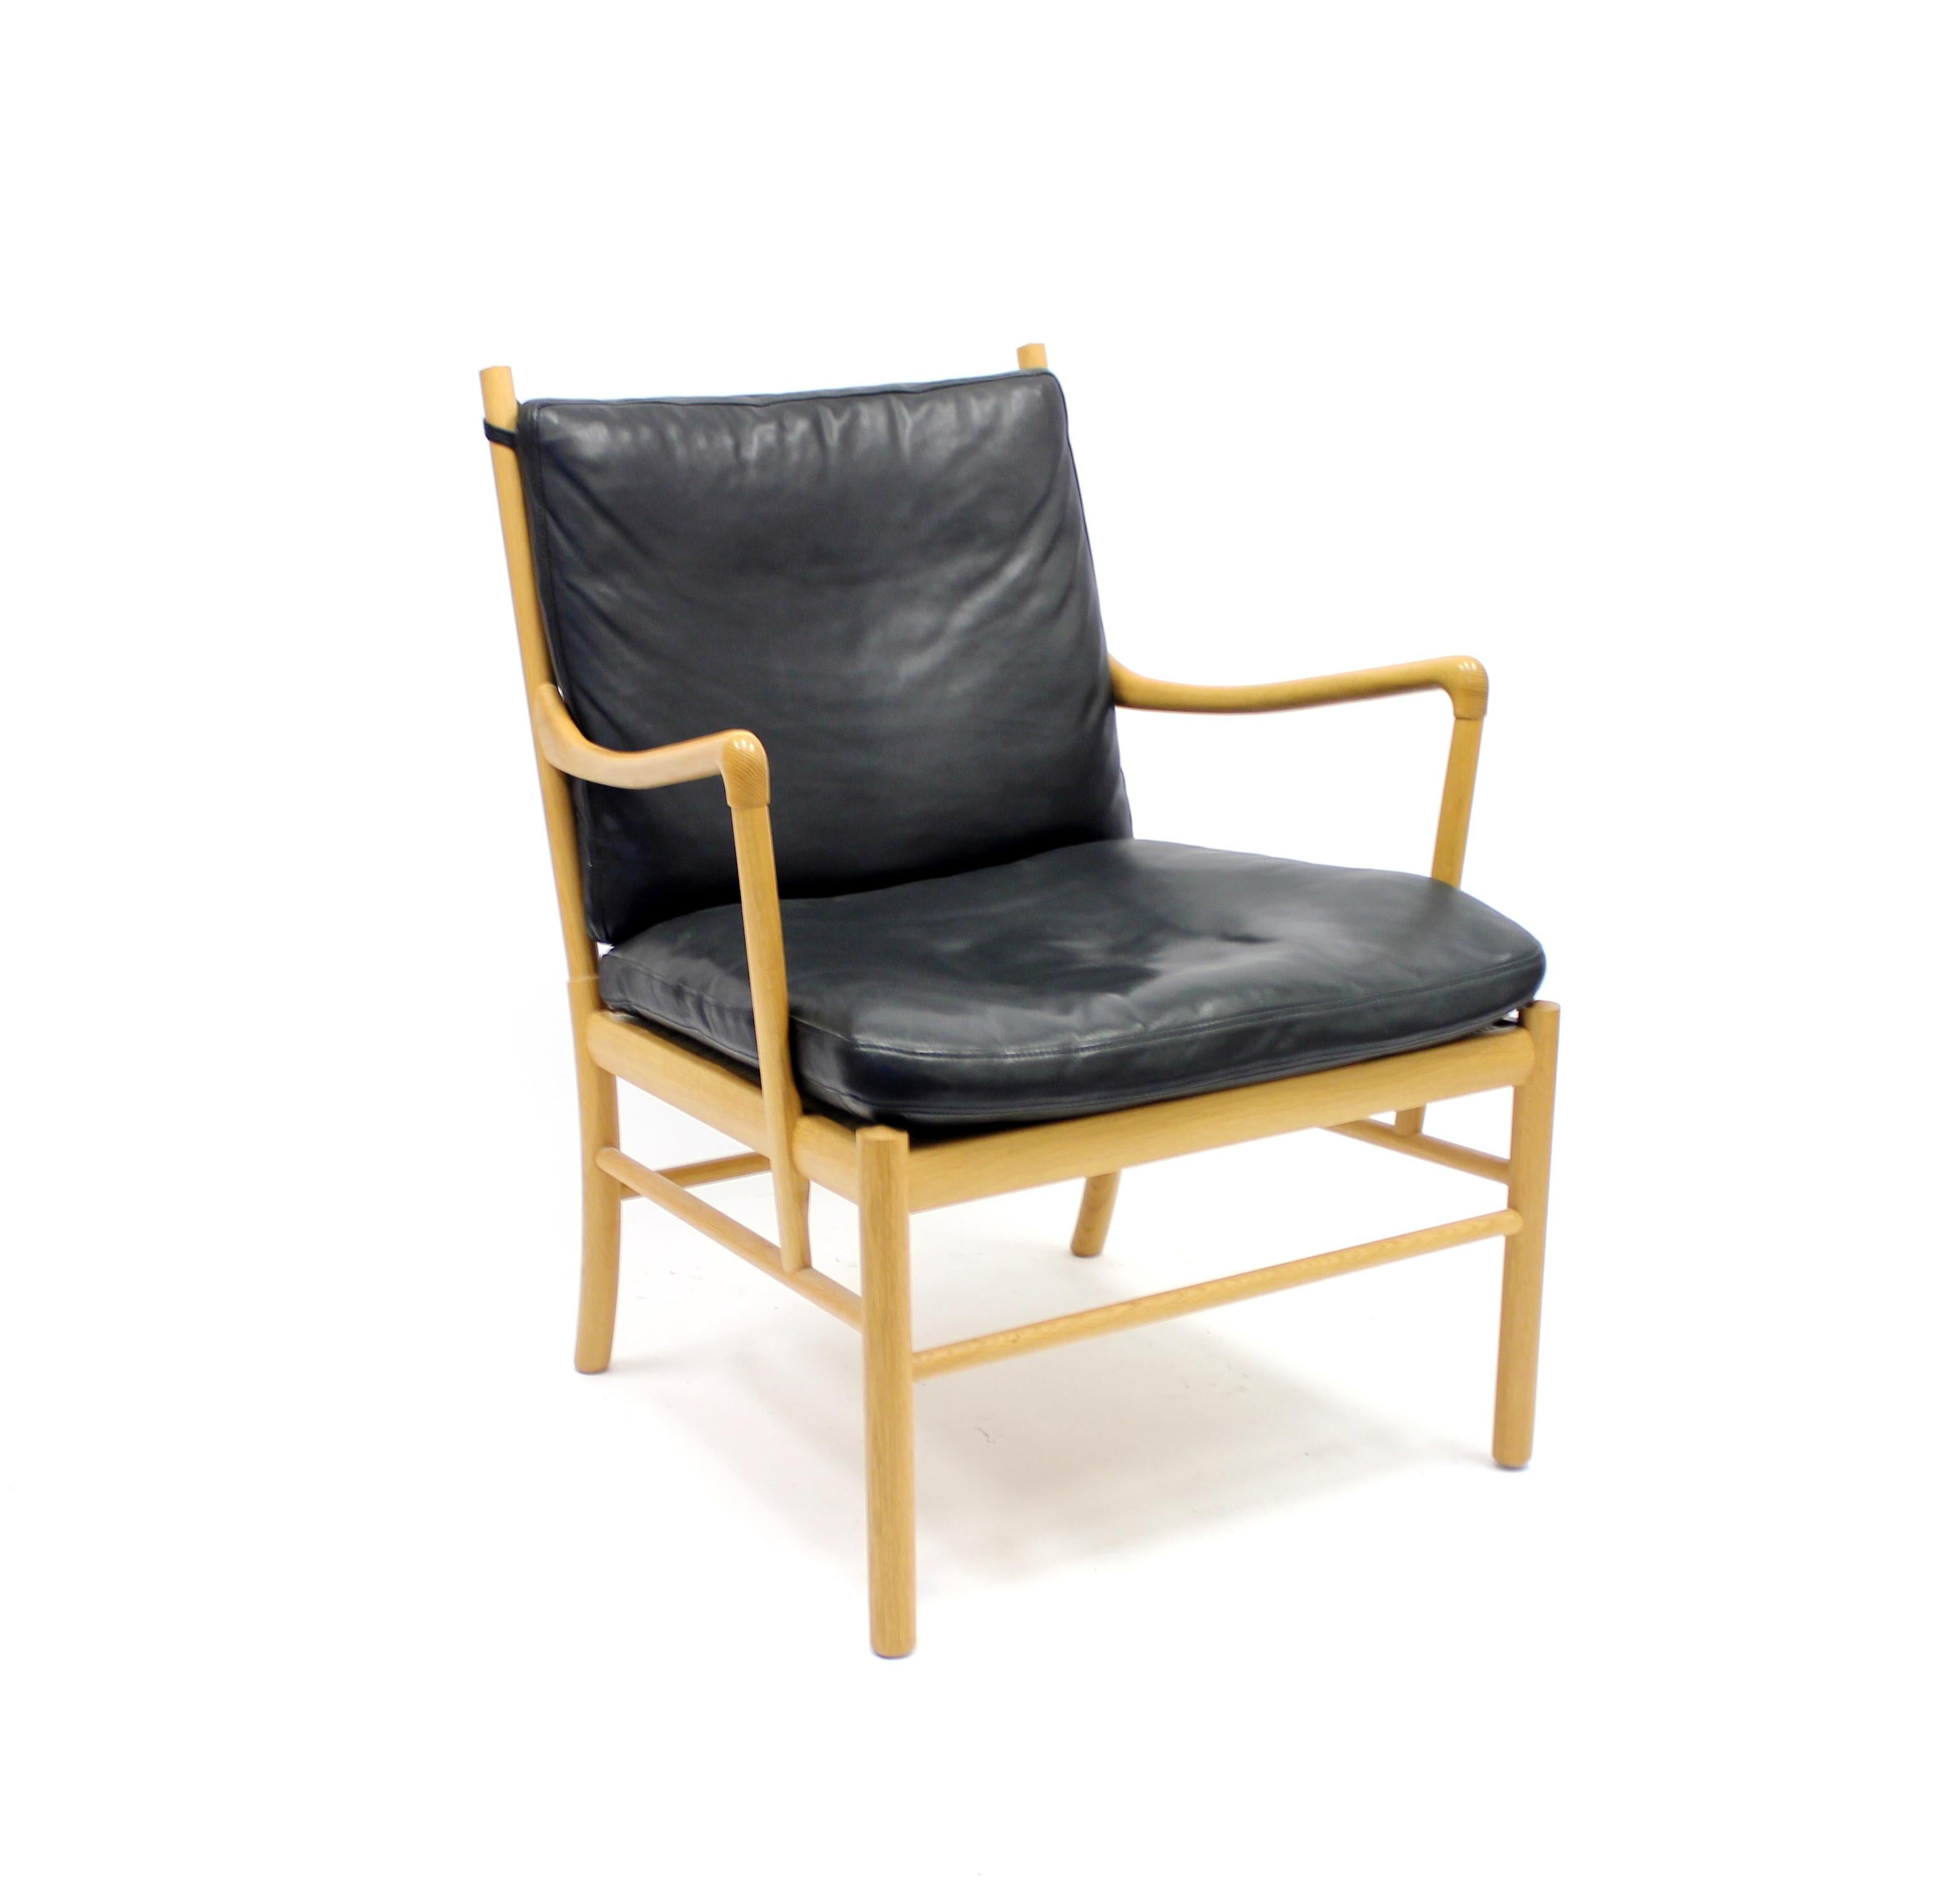 The Colonial chair designed by Ole Wanscher for Carl Hansen & Søn with an oak frame and premium black leather cushions on seat and back. Seat cushion rests on a rattan suspension. This chair was originally designed in 1949 and was from the beginning